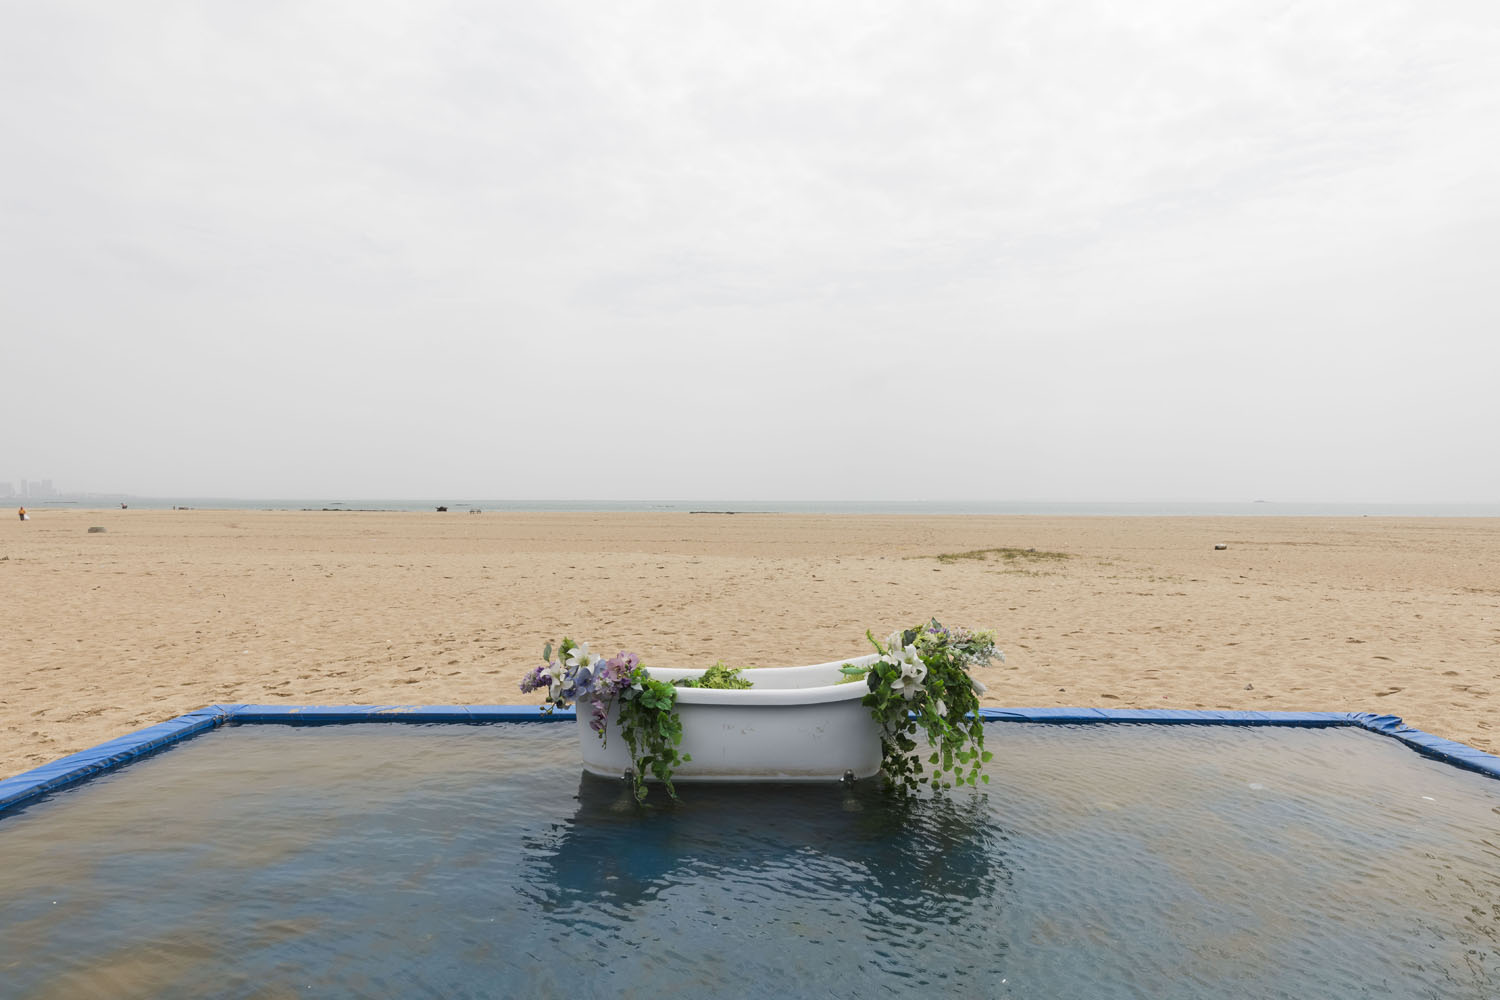 Bathtub and imitiation flowers sit inside a small pool, used for wedding photography at Guanyinshan Fantasy Beach. Xiamen, China. 2018.